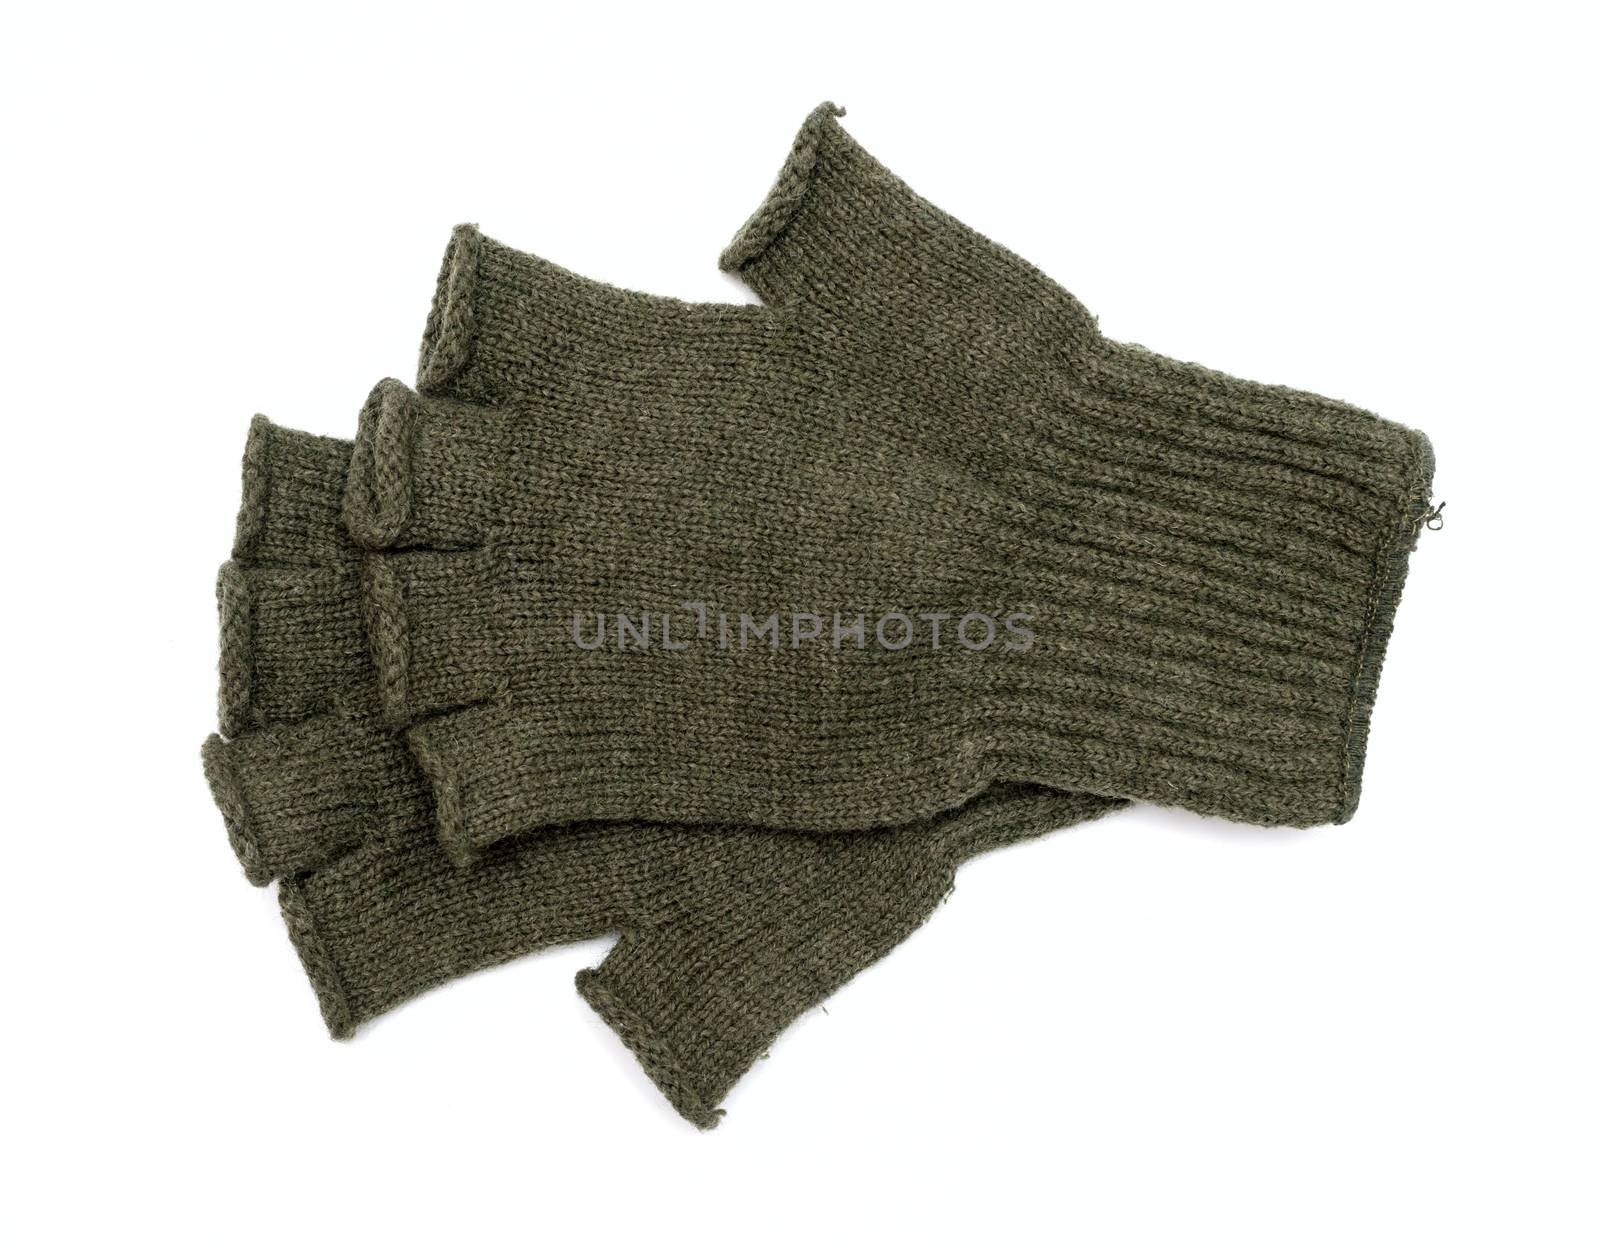 New Green Knit Wool Gloves isolated on white background by DNKSTUDIO